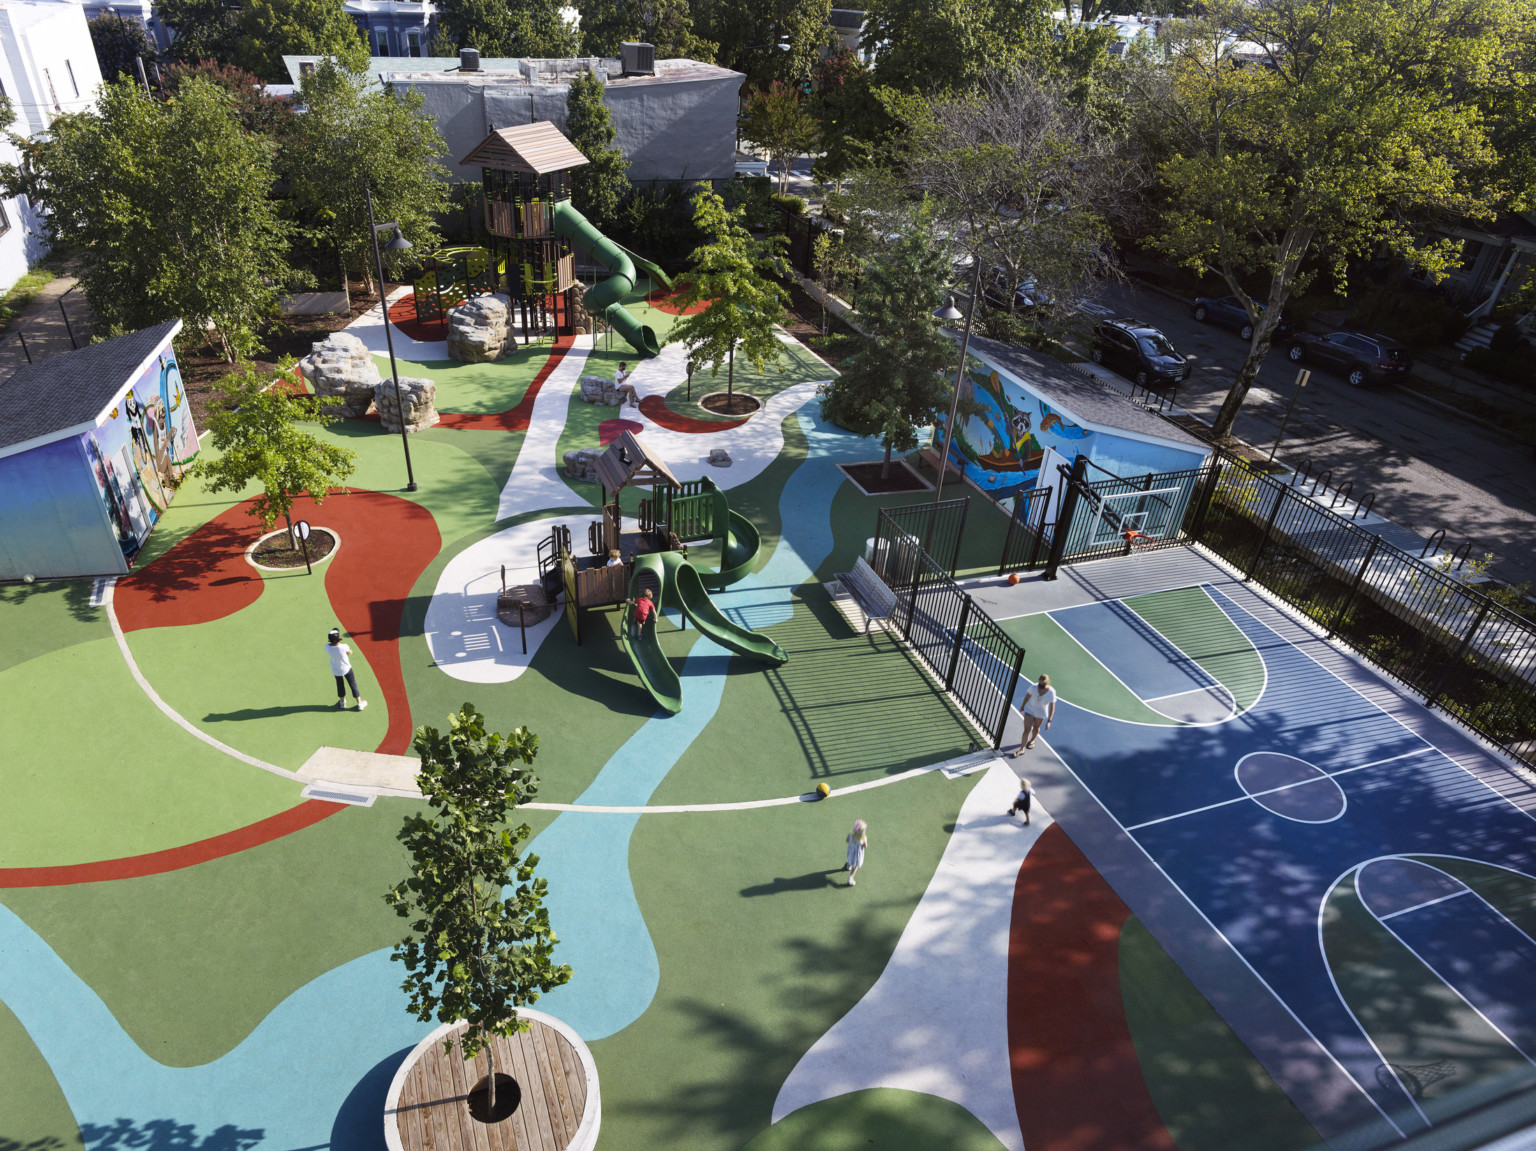 Aerial view of playground with trees, multicolor ground, murals. Blue and green partially fenced in basketball court, right